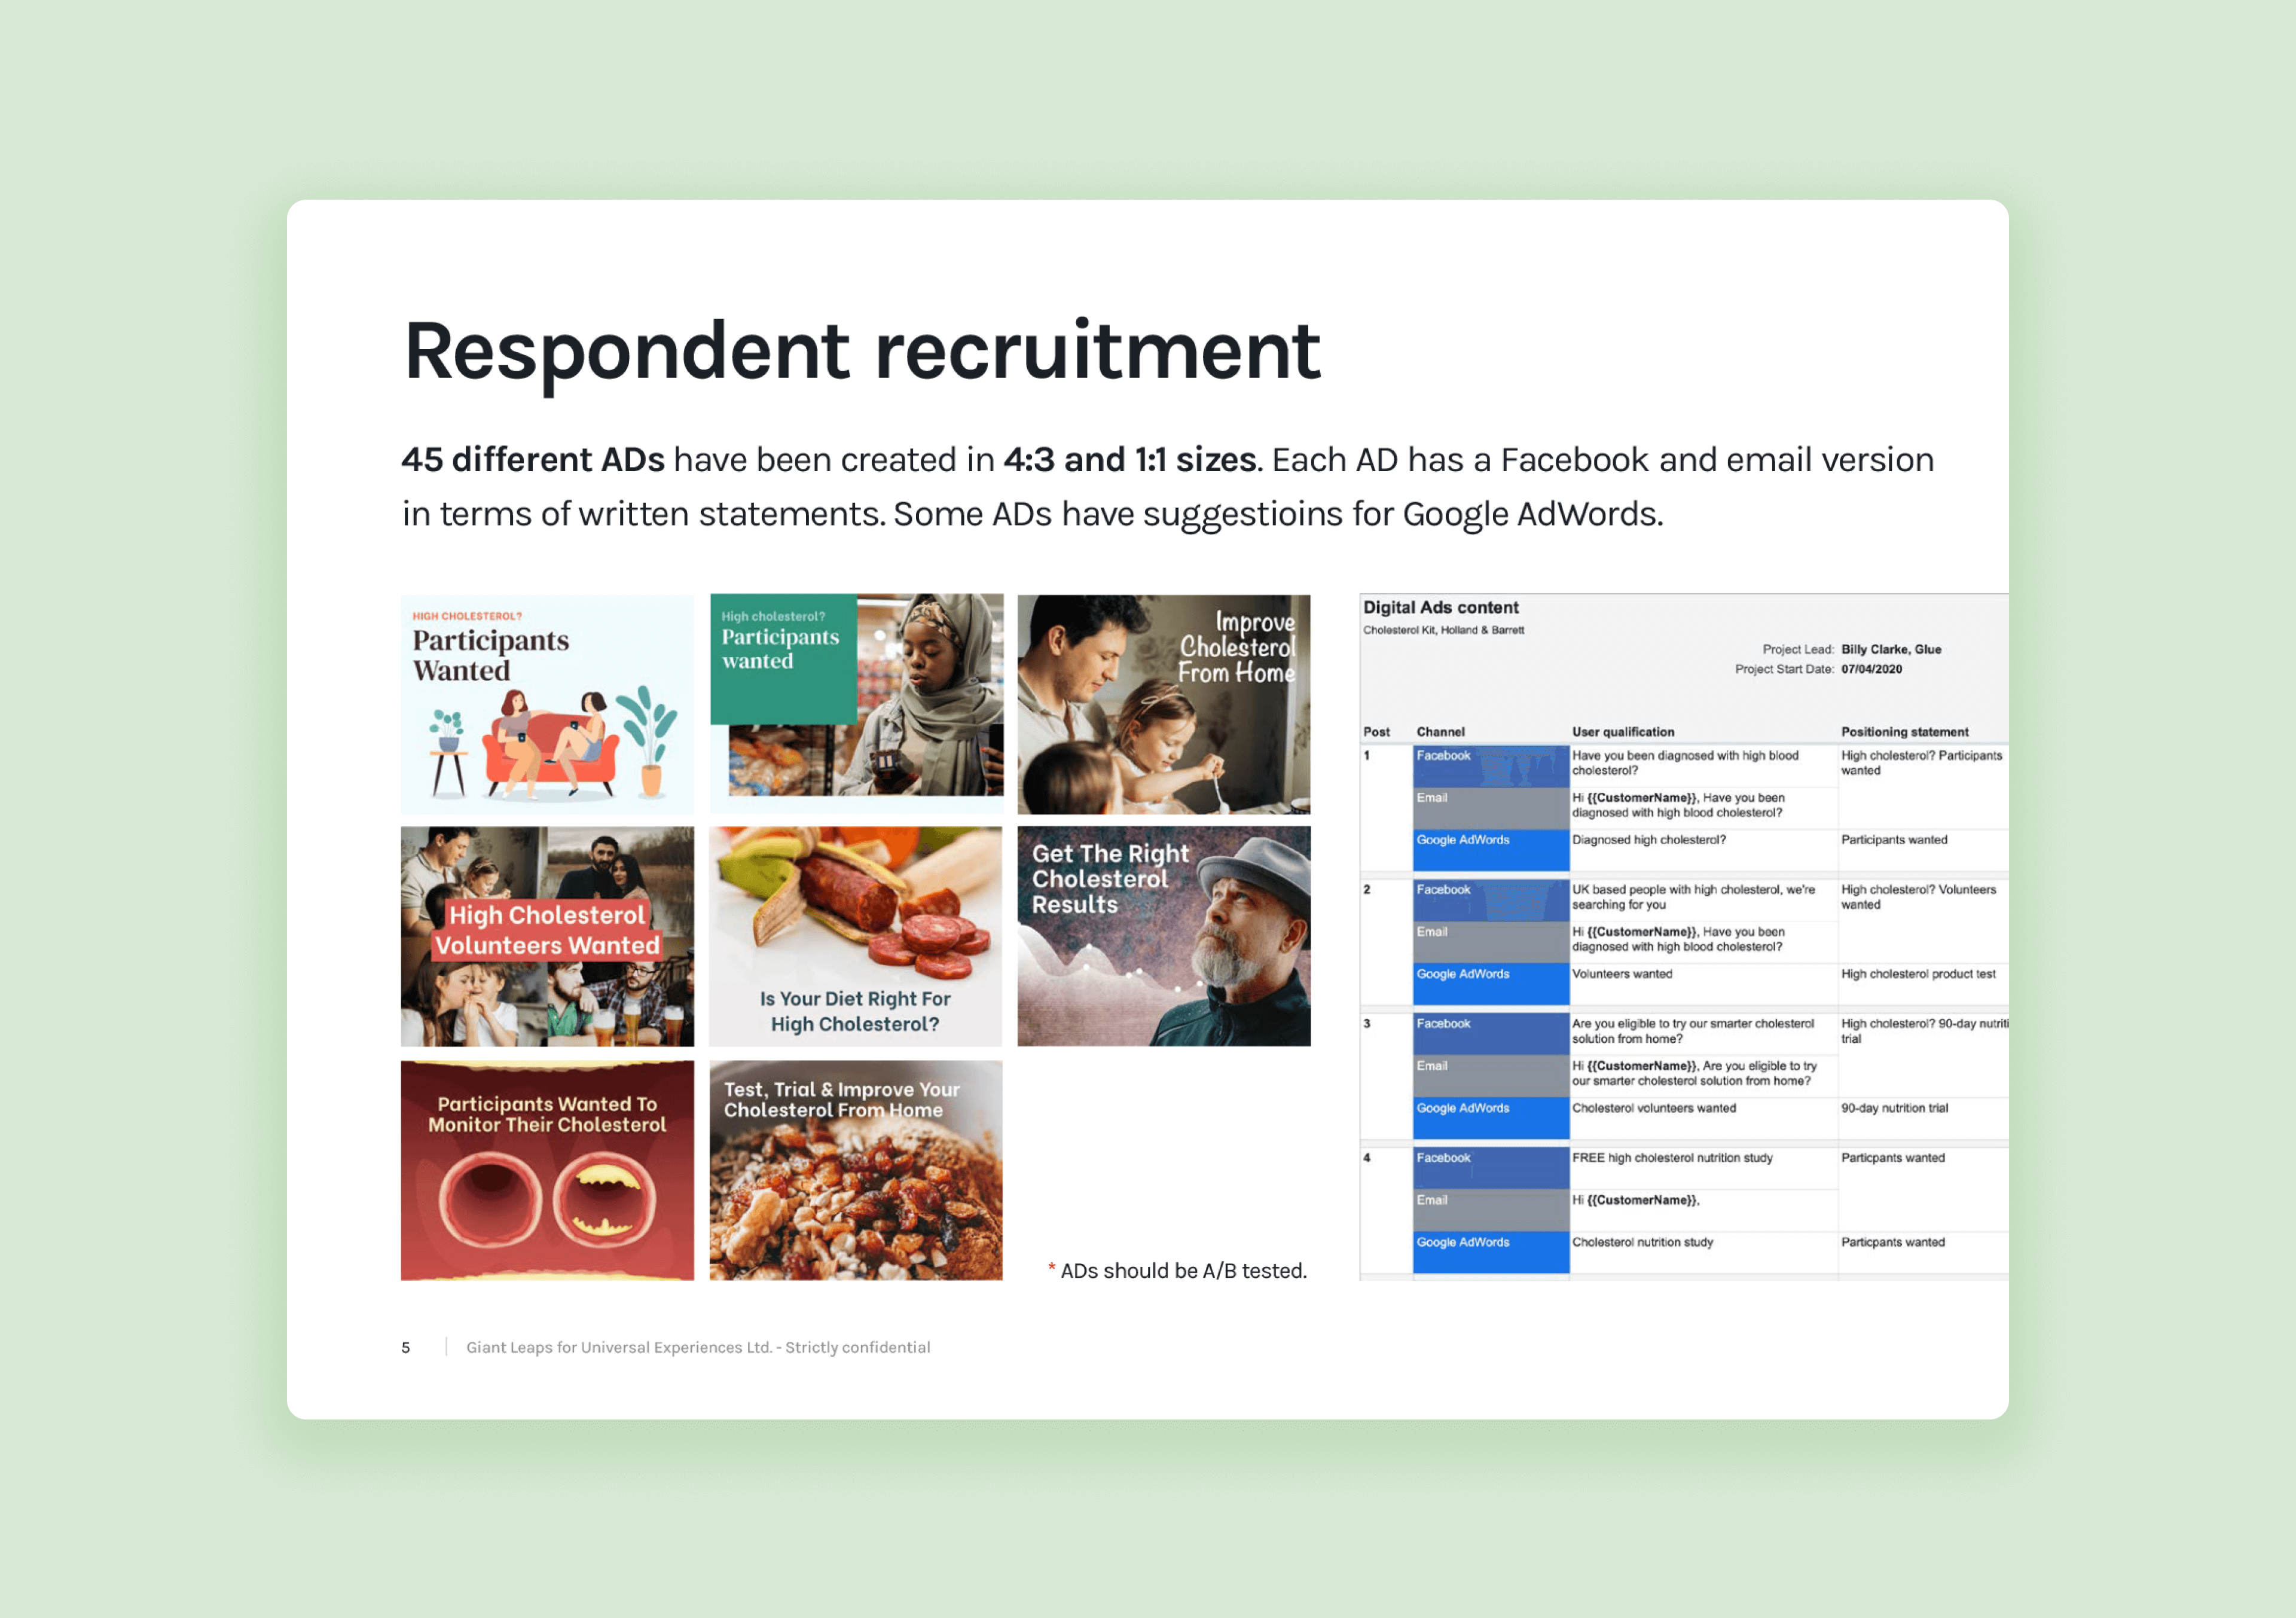 An image showing the respondent recruitment details of a usability study